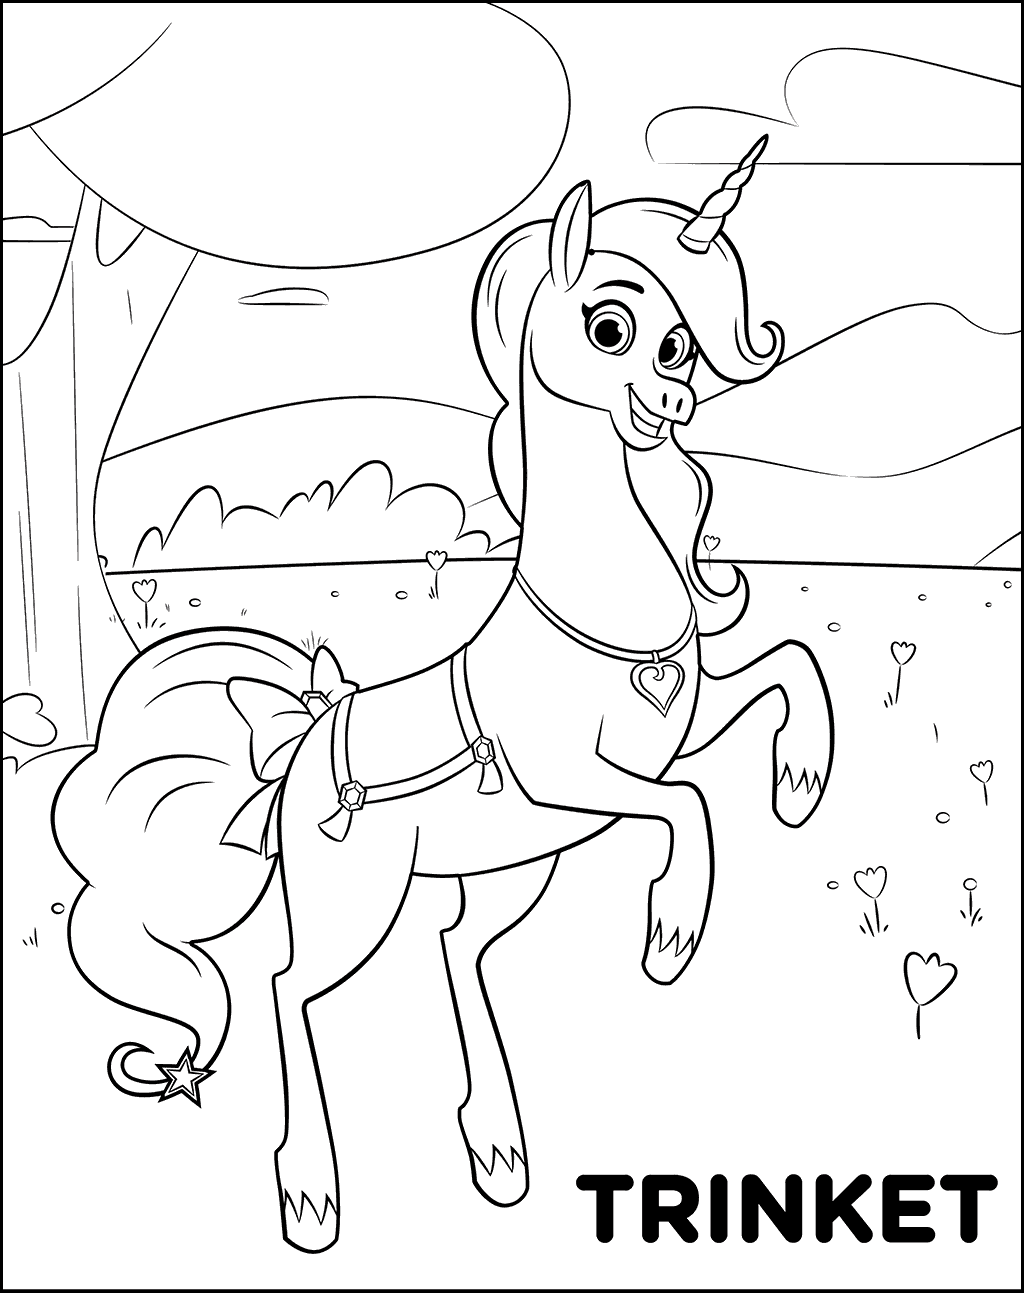 Magical Pet Unicorn Trinket For Girls Coloring Page